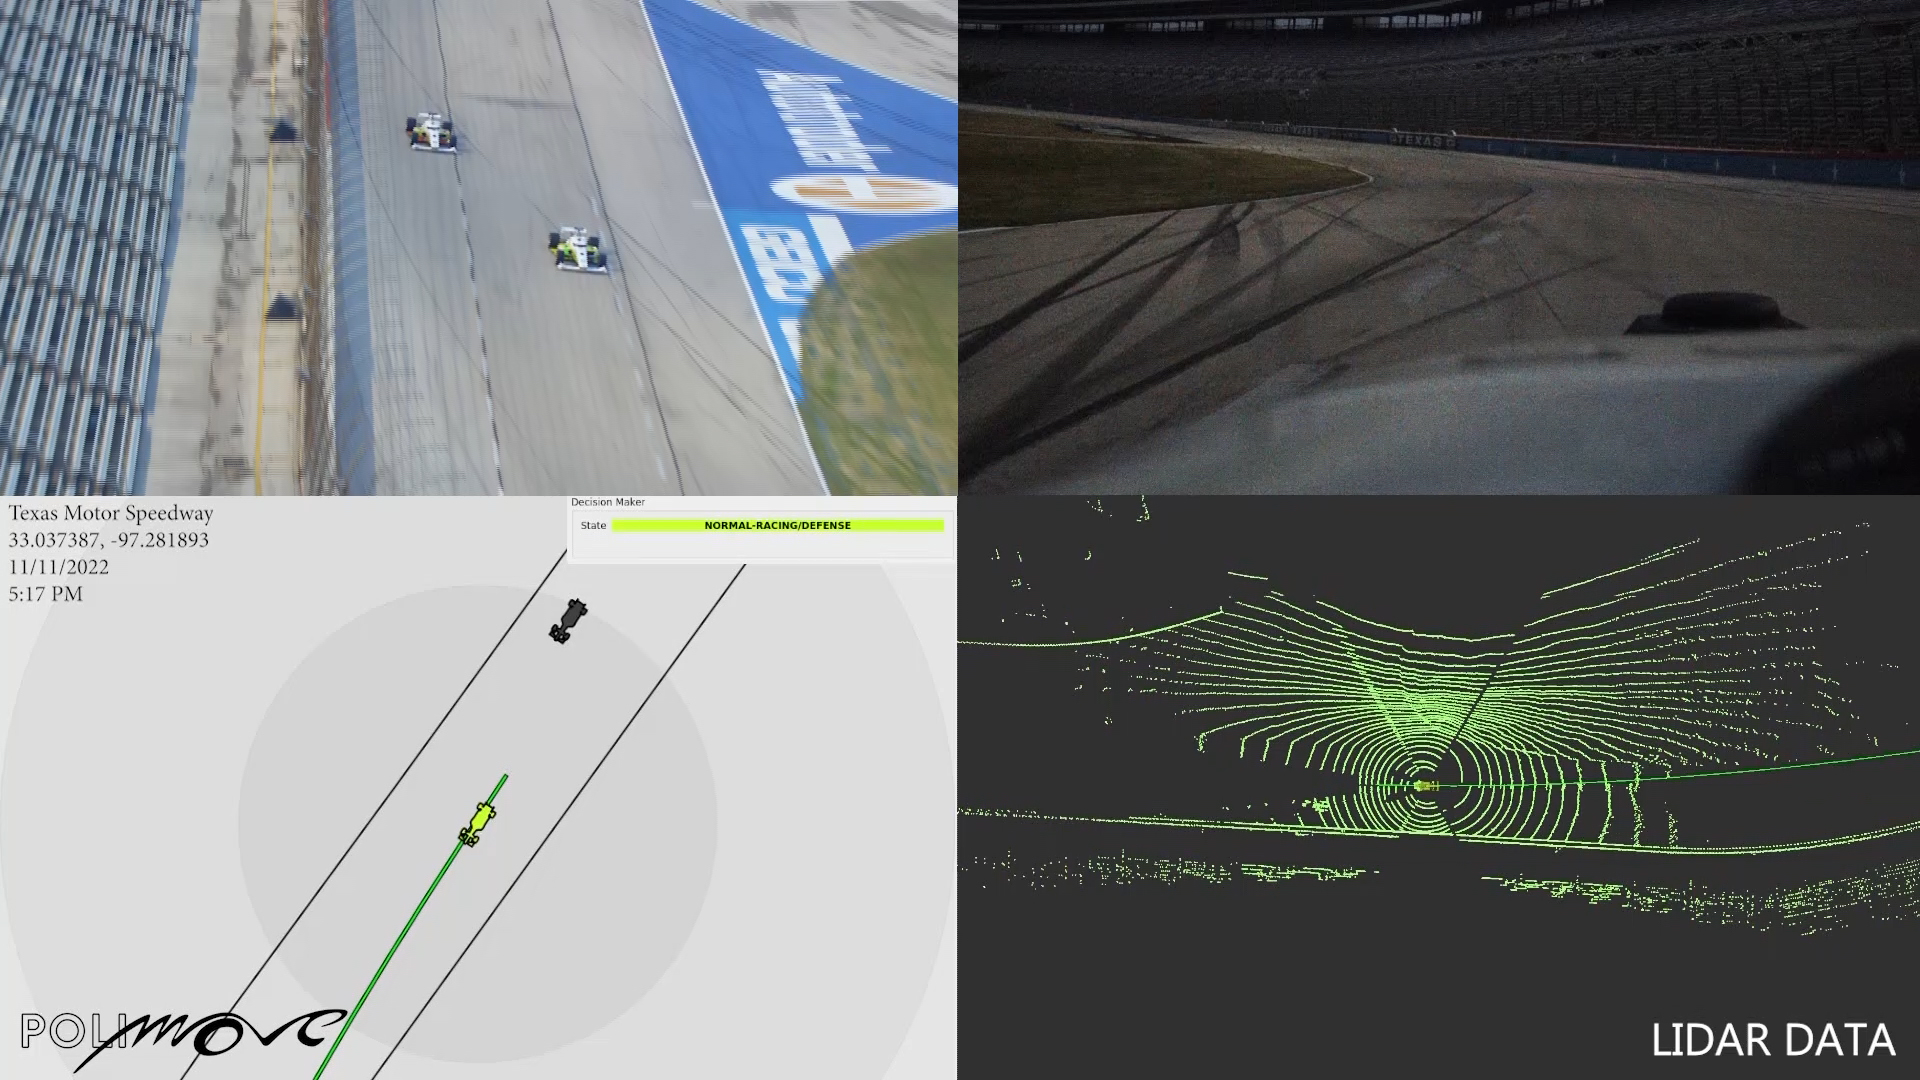 In the final round of the Indy Autonomous Challenge Powered by Cisco at Texas Motor Speedway, the PoliMOVE AI driver is seen here immediately detecting an emergency situation (the AI Racing team's car unexpectedly slowing down in front of it after a completed overtake), and promptly reacting by slowing down and shifting left to avoid a major collision.